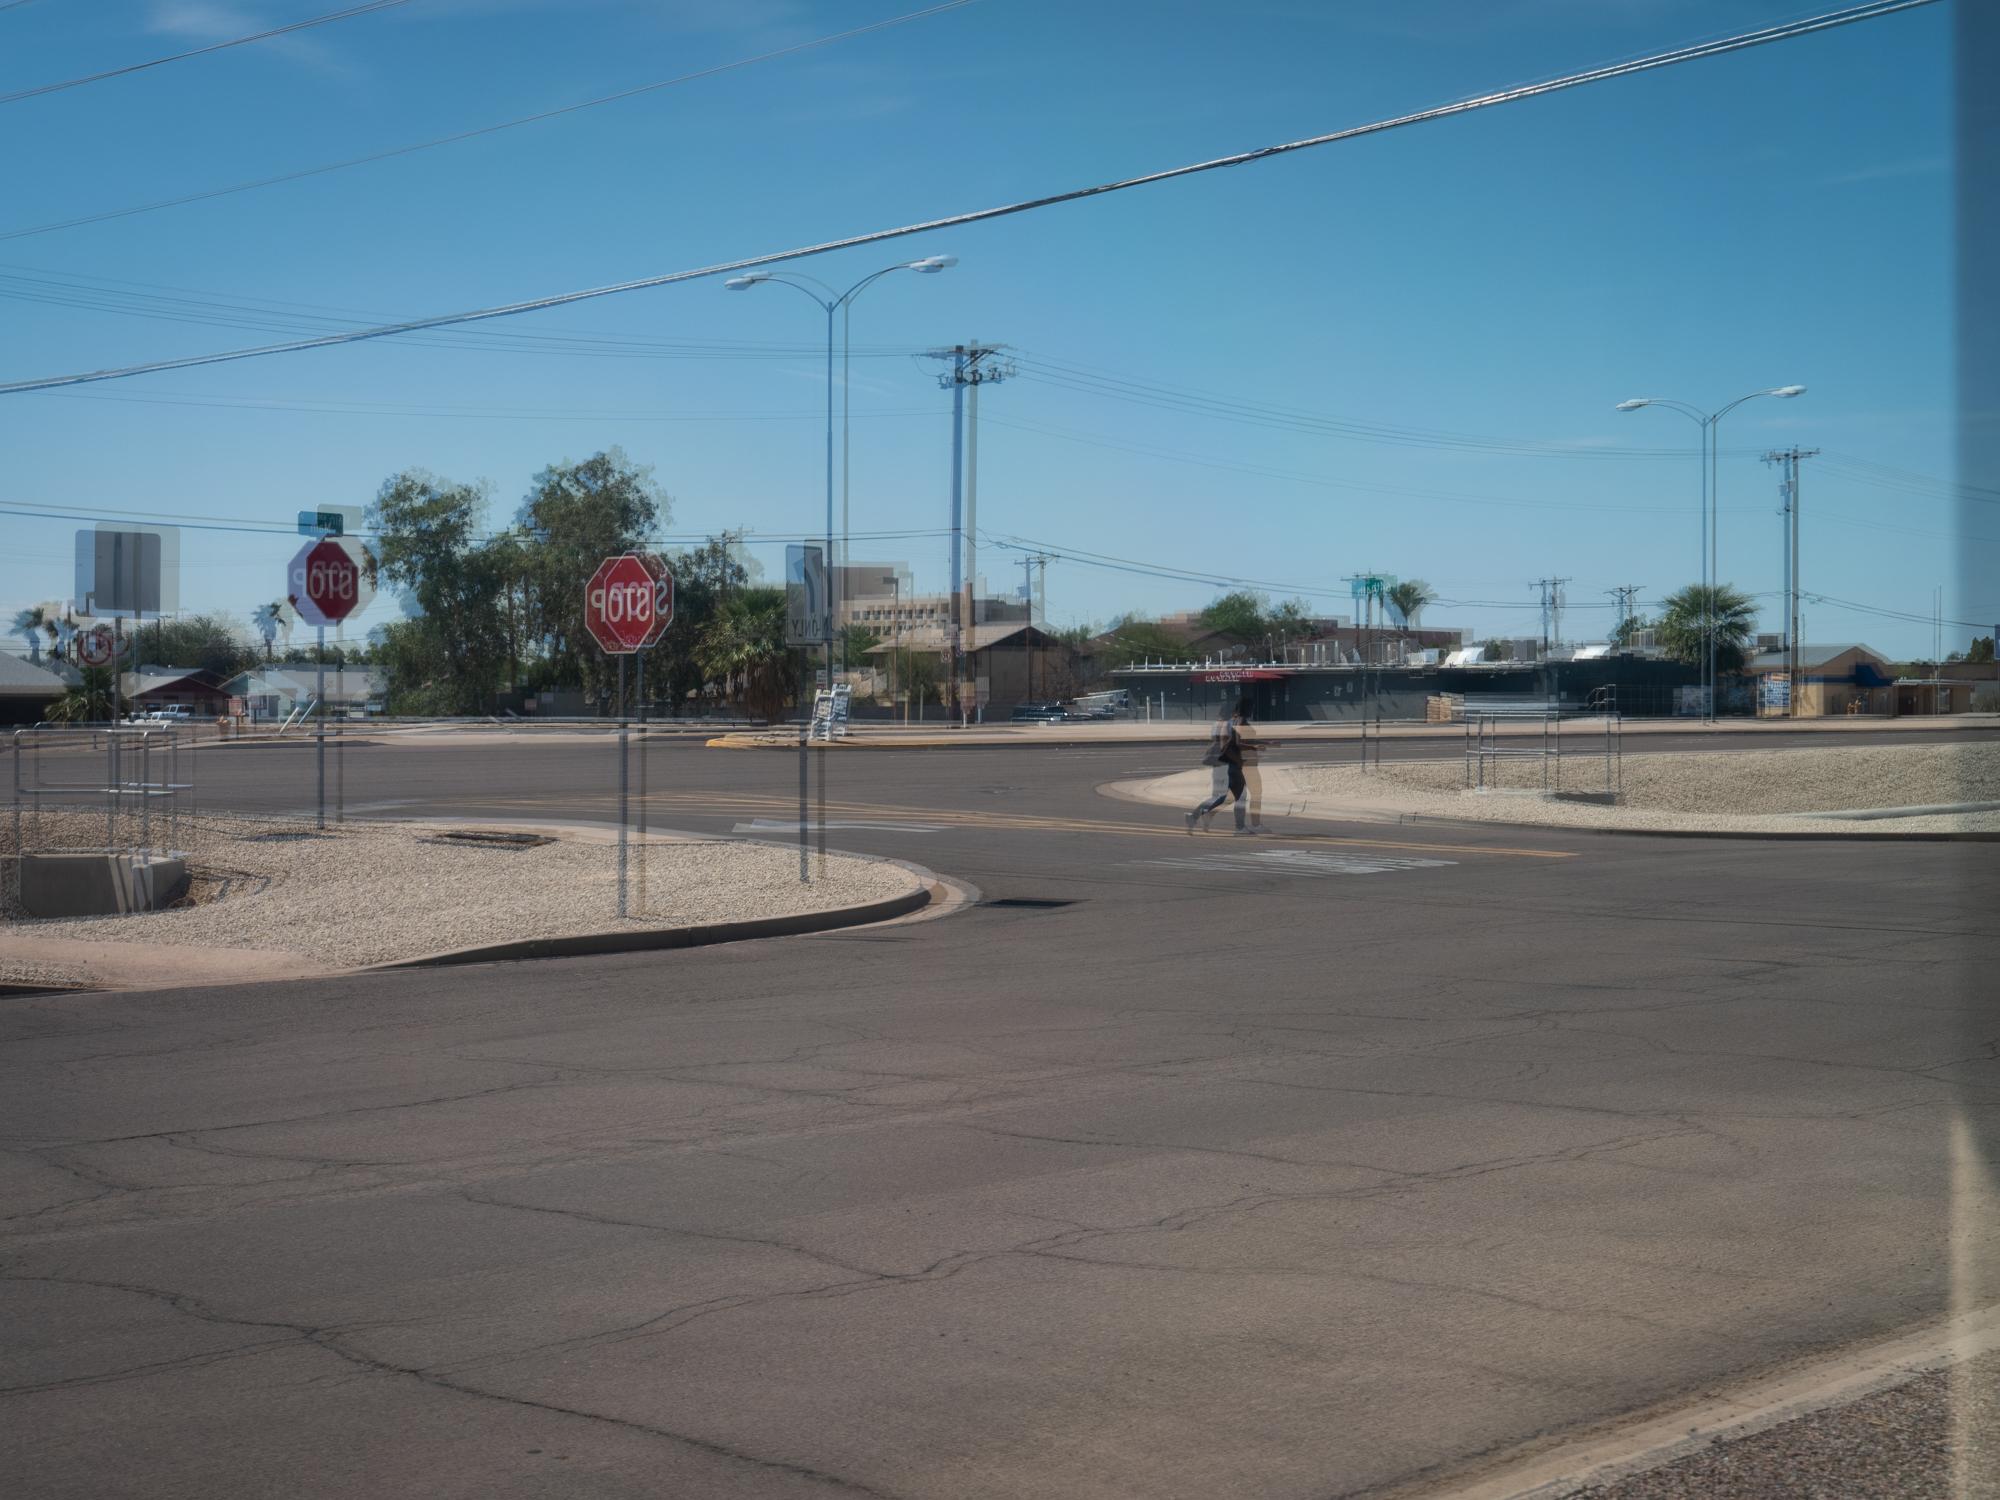 New Arizonans - HuffPost - A surreal streetscape is revealed in the reflection on a...